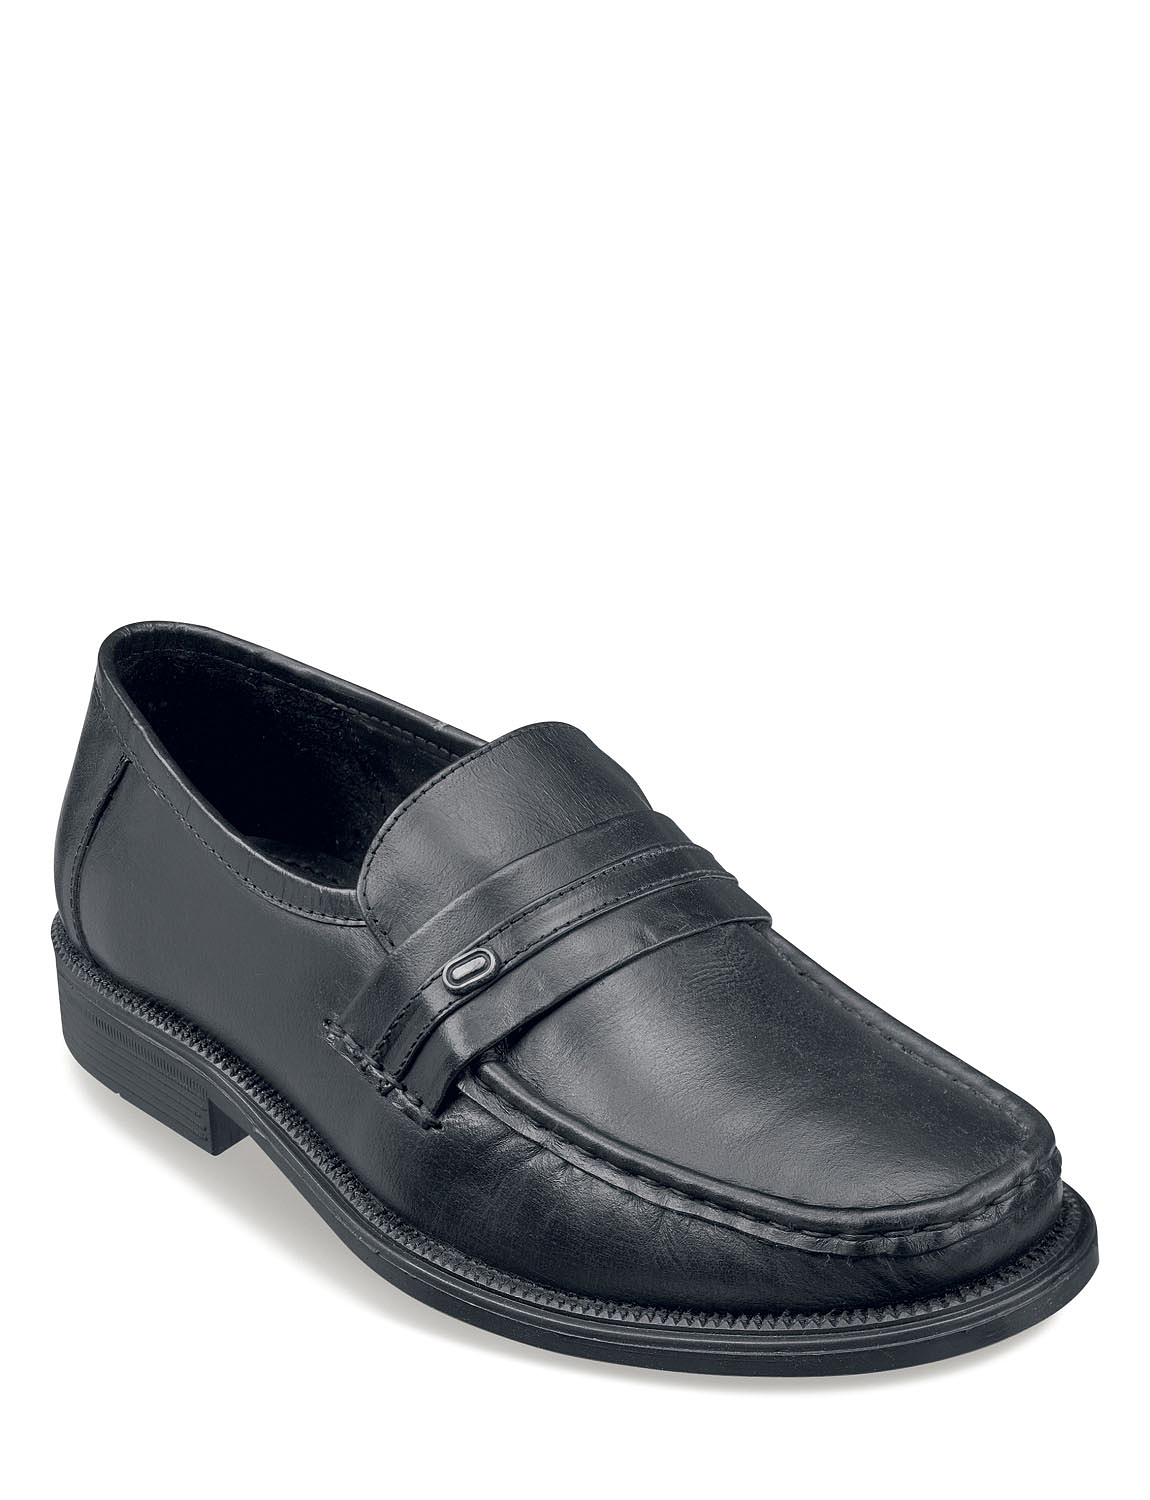 Leather Wide Fit Slip On Moccasin Shoe | Chums